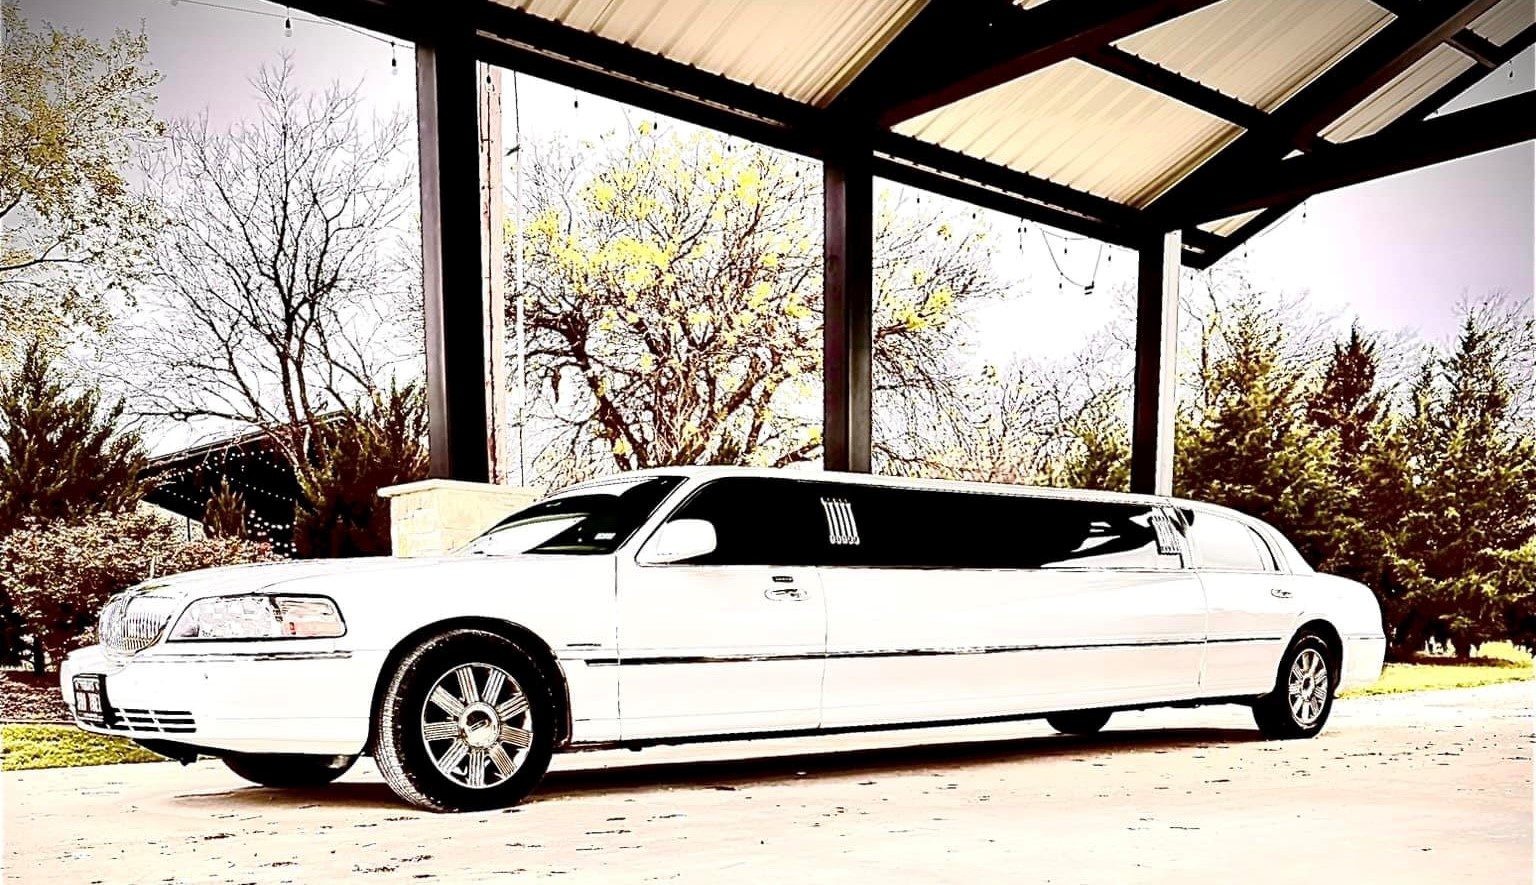 White limousine parked under a shelter.